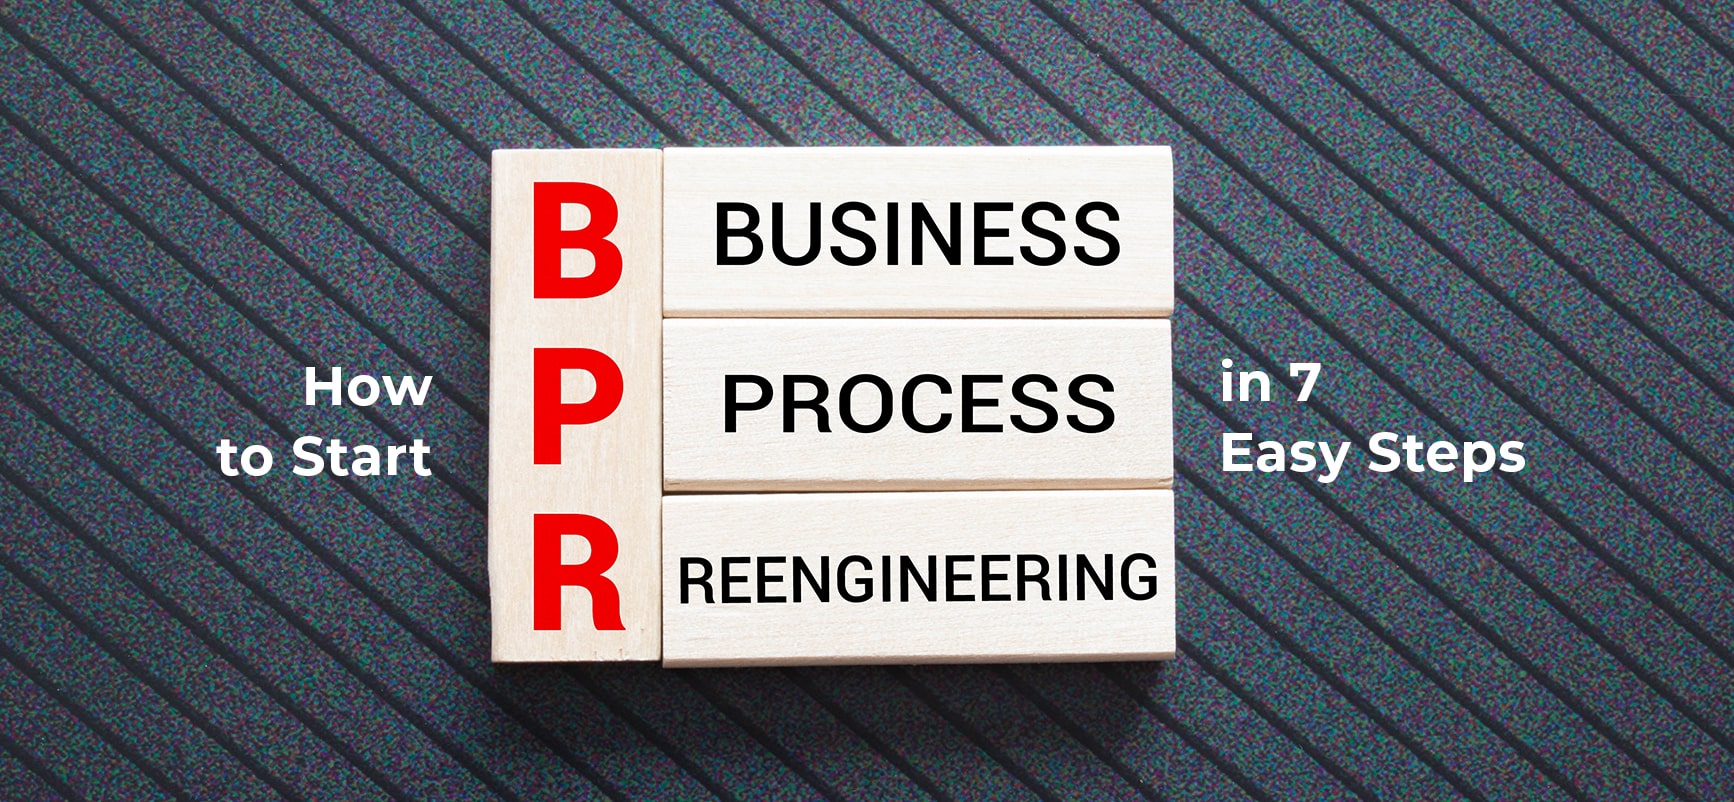 How to Start Business Process Reeingineering in 7 Easy Steps